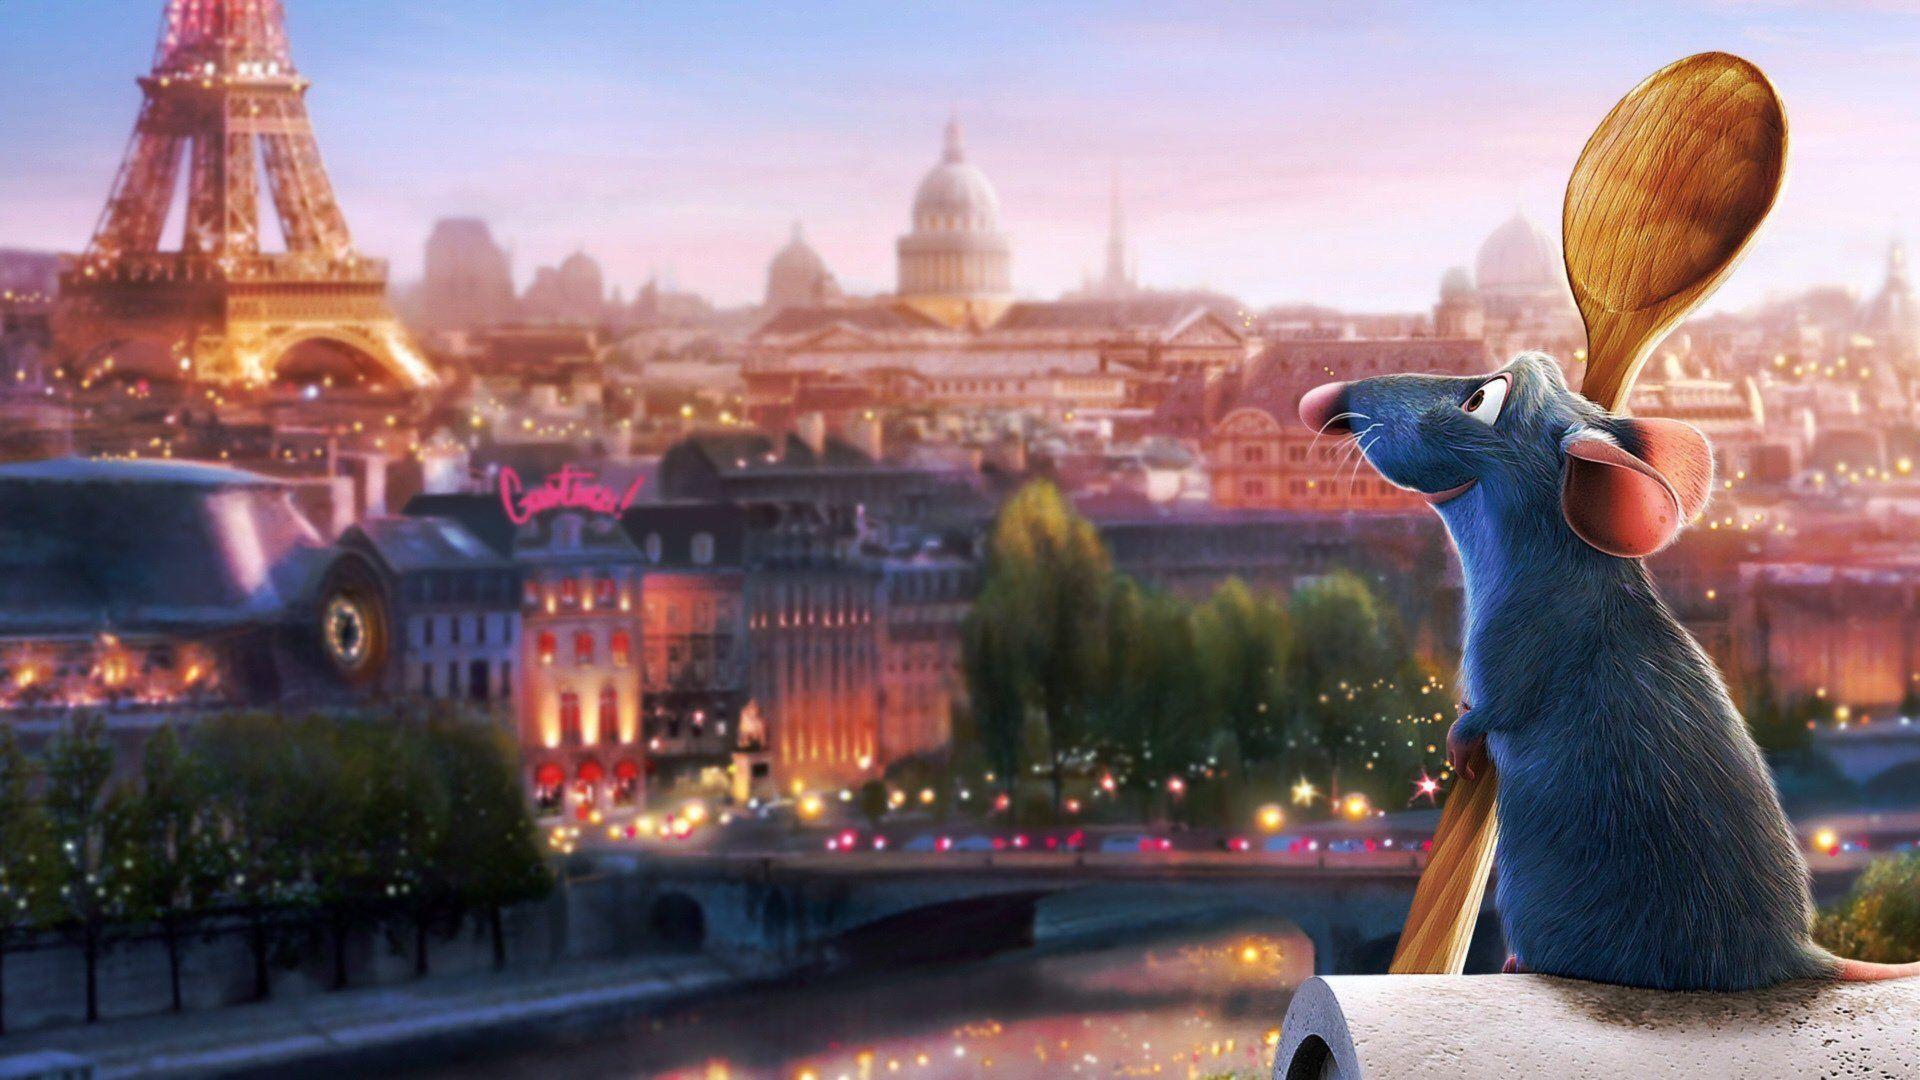 Ratatouille Movie HD Wallpapers  Ratatouille HD Movie Wallpapers Free  Download 1080p to 2K  FilmiBeat